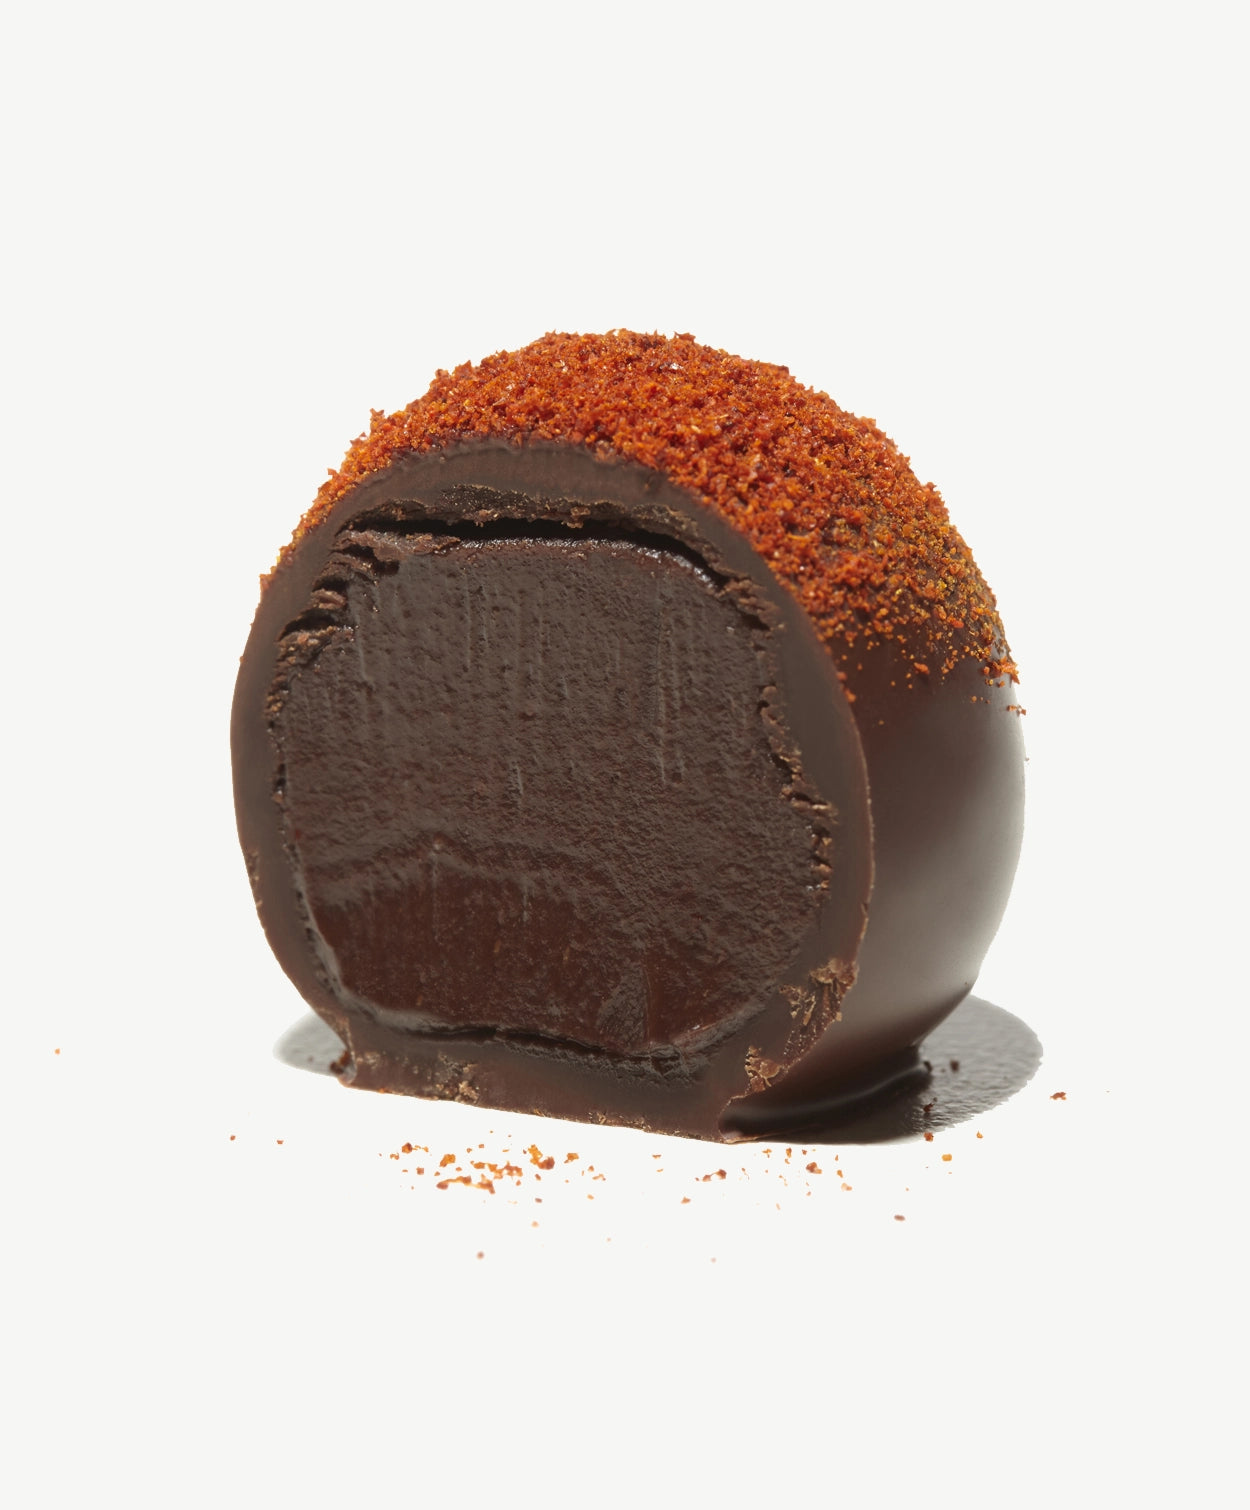 Close up view of a Vosges Budapest truffle coated in dark chocolate and topped with Kalocsan paprika on a white background.